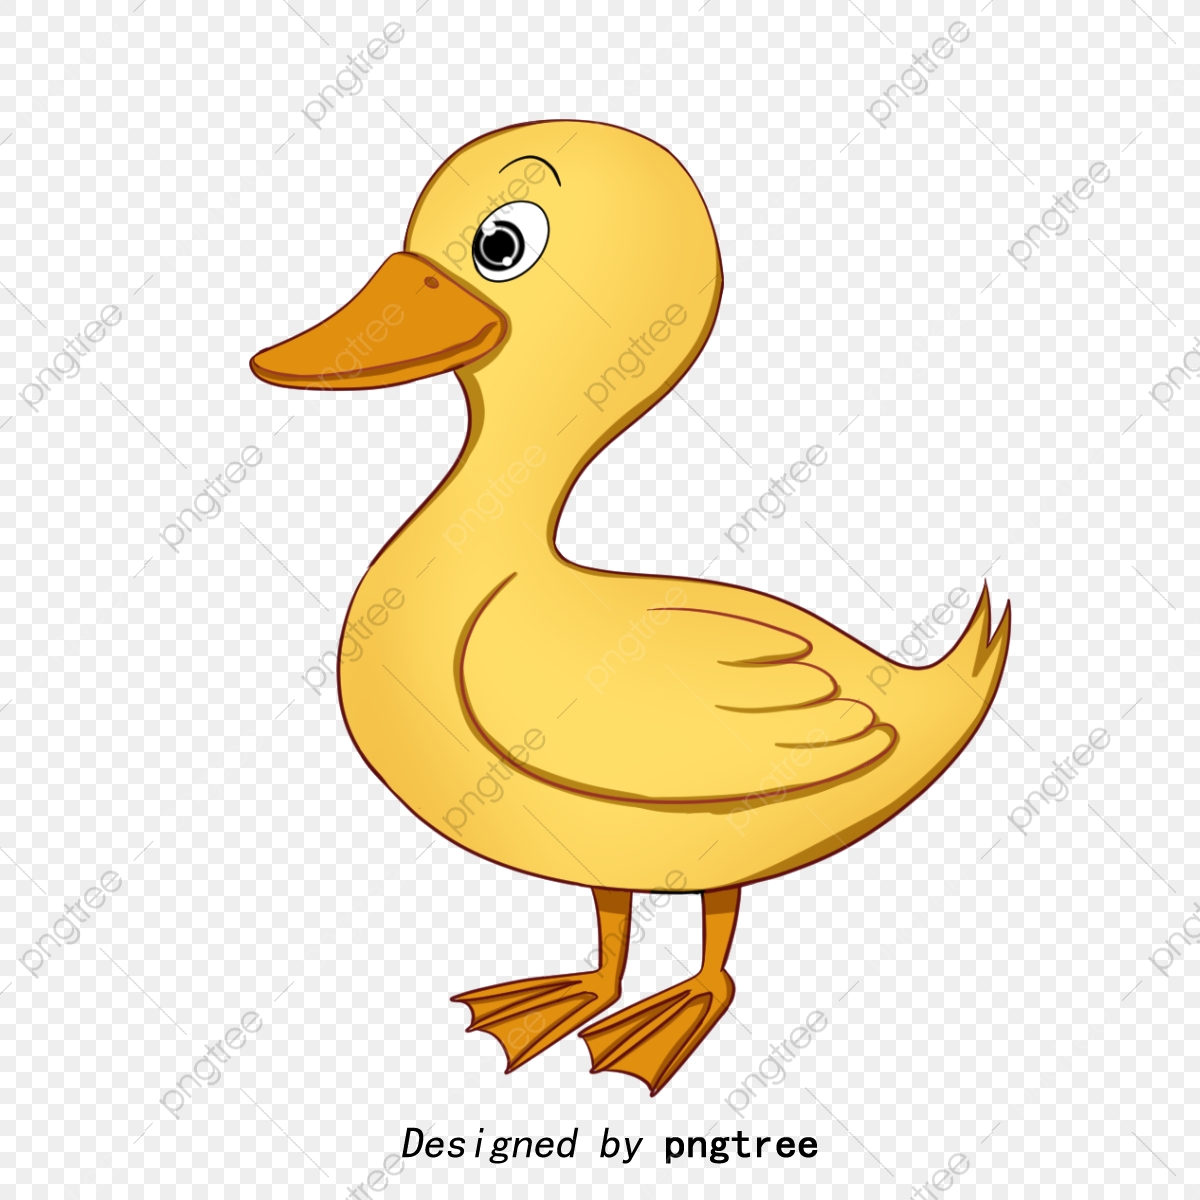 duckling clipart yellow animal